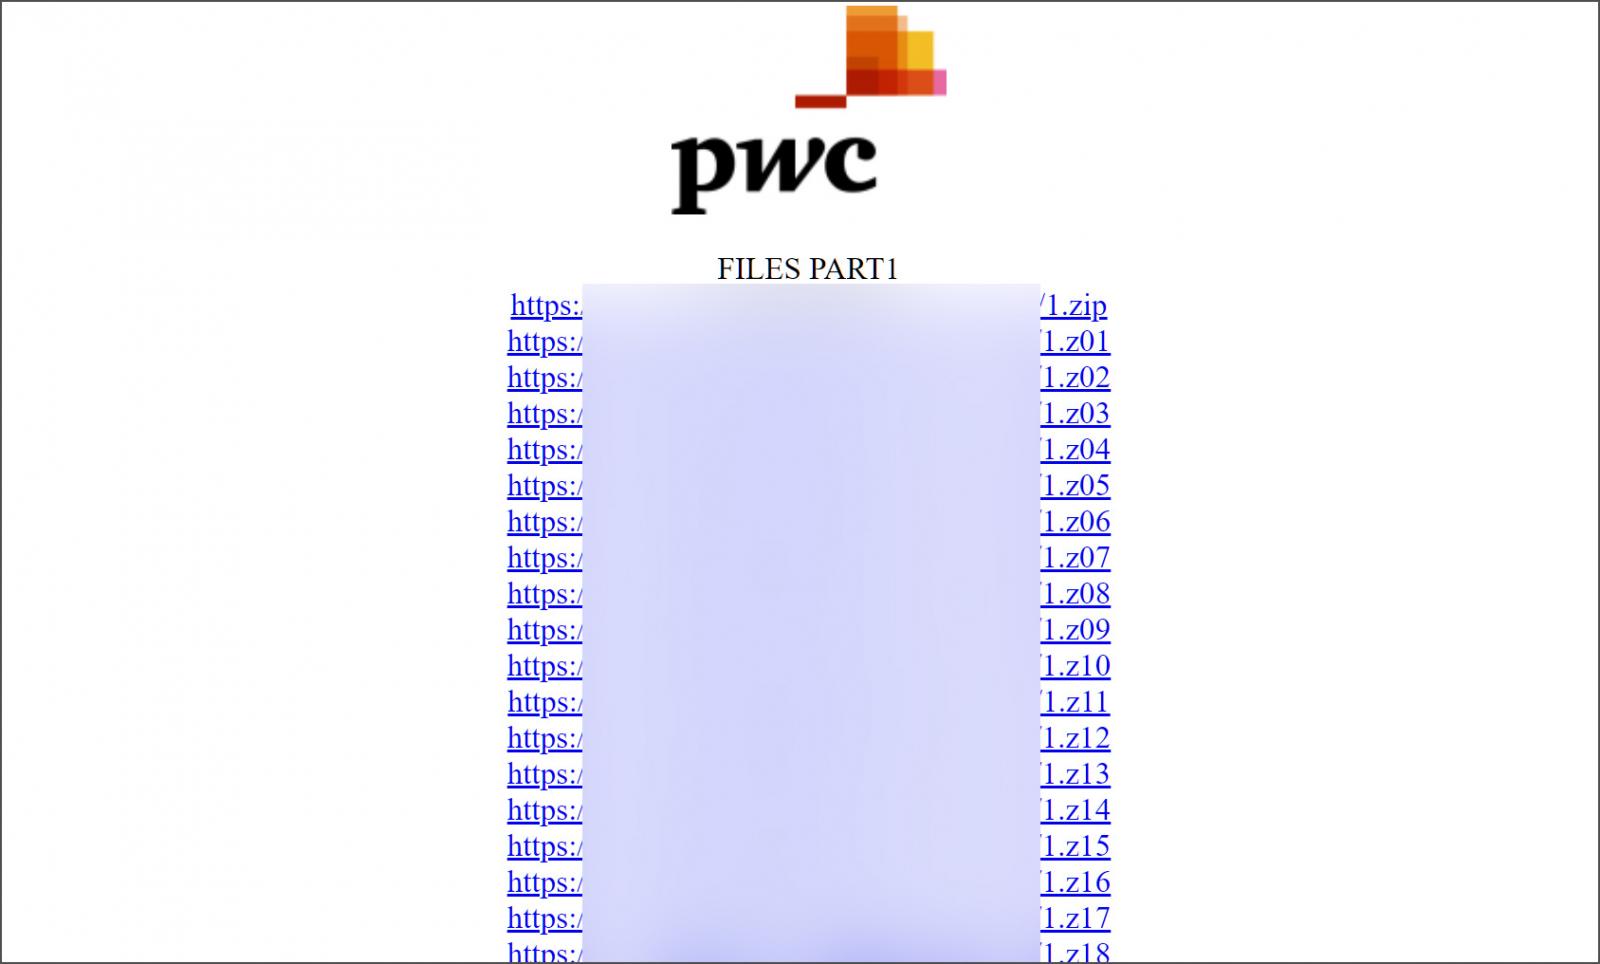 Clearweb site created to disclose PWC data